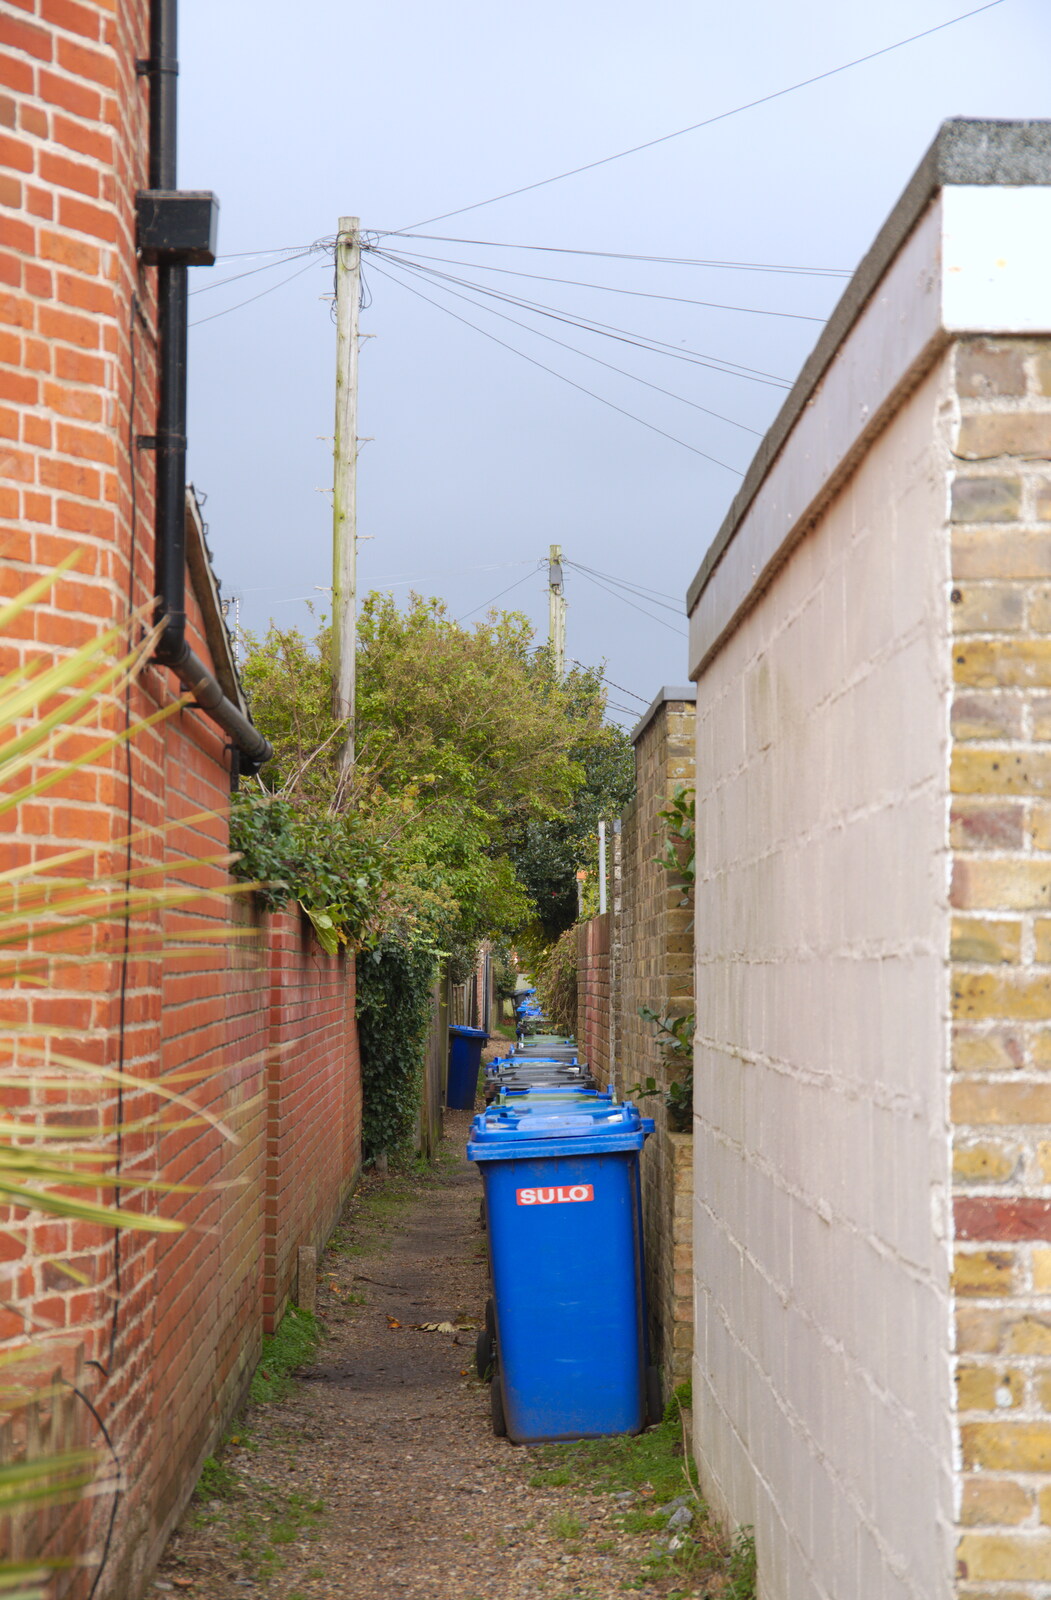 Southwold wheelie bins in an alley from A Night at the Crown Hotel, Southwold, Suffolk - 8th November 2019